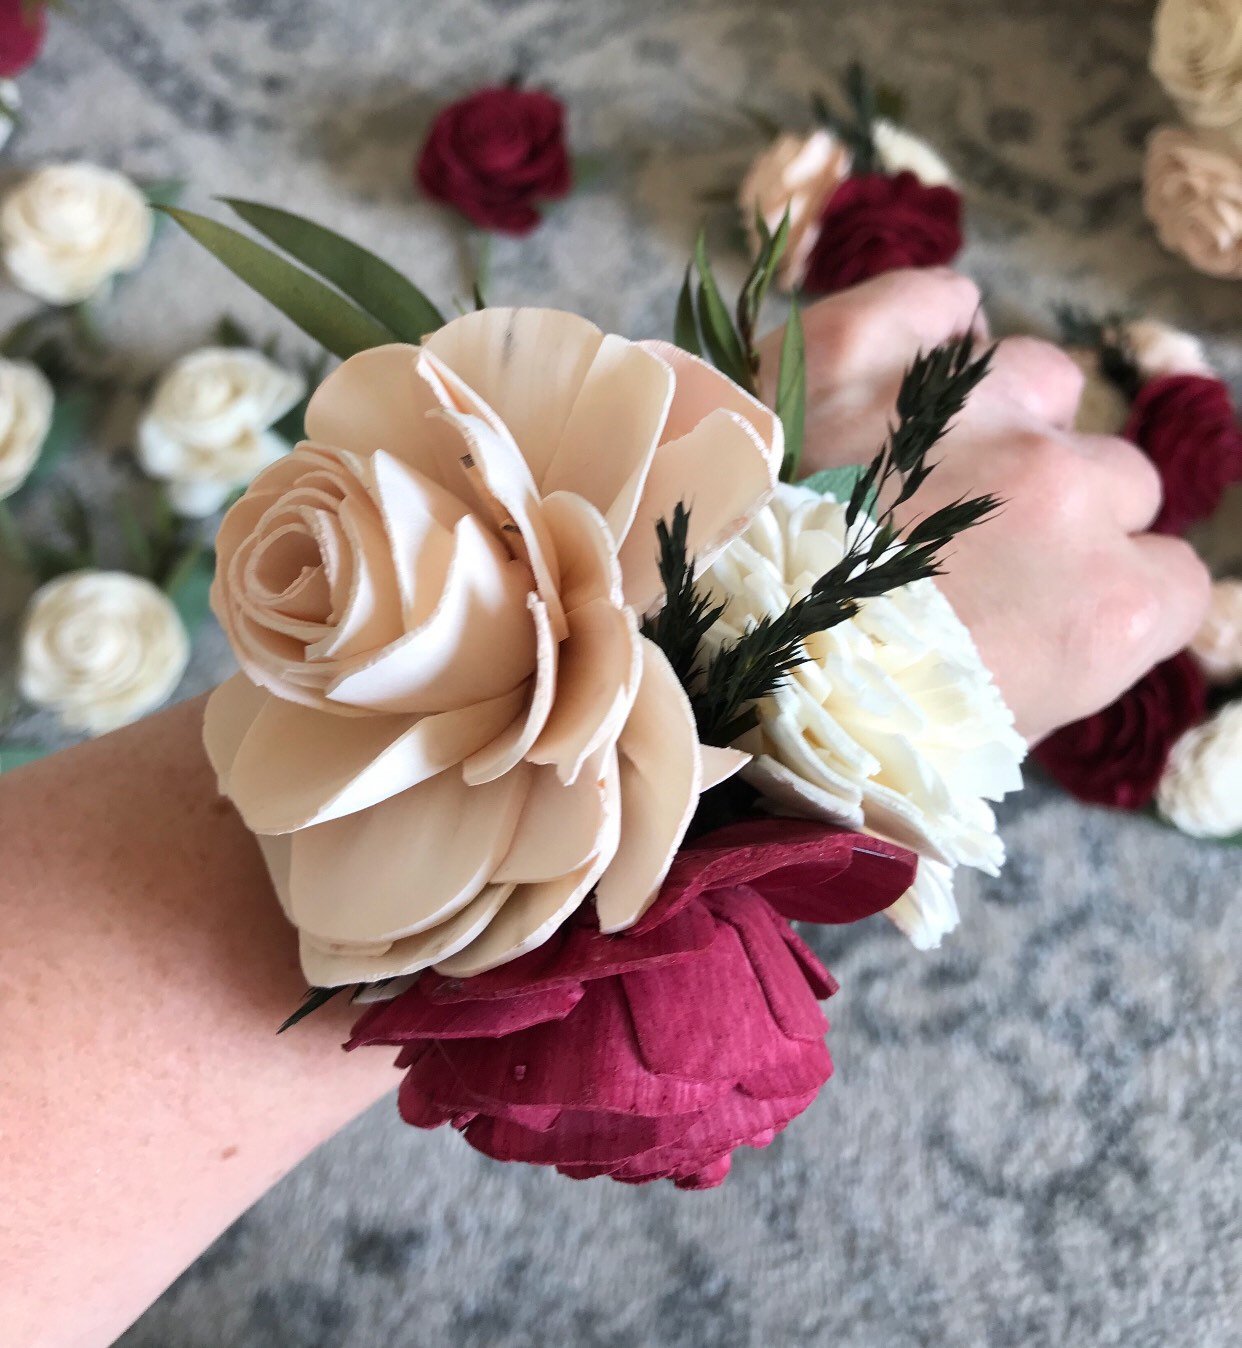 Wrist Corsages for Wedding(Set of 4), Foam Rose Corsages with